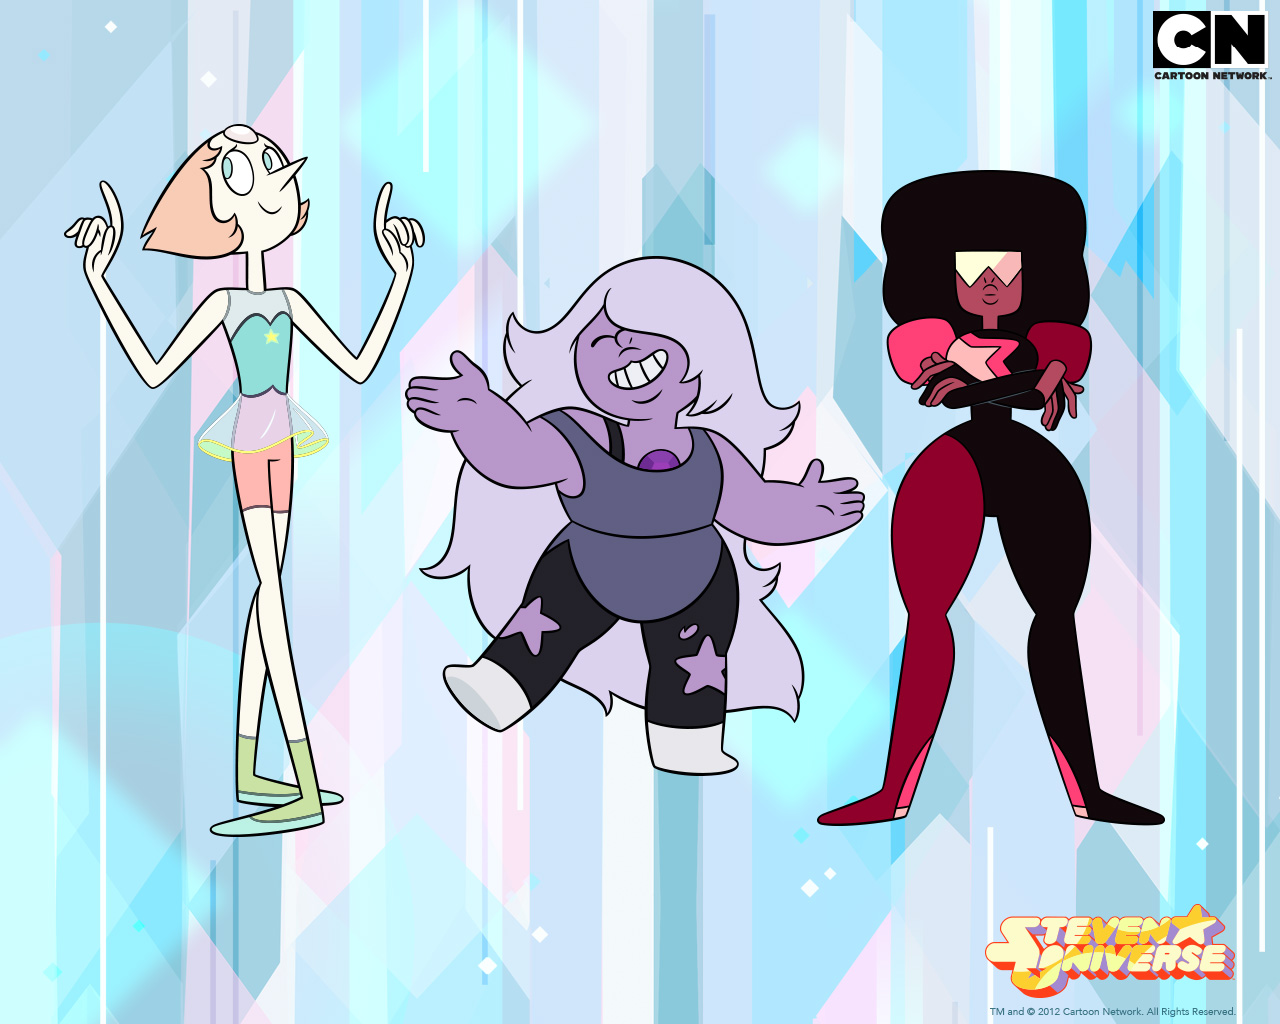 The crystal gems: strong women in geek culture